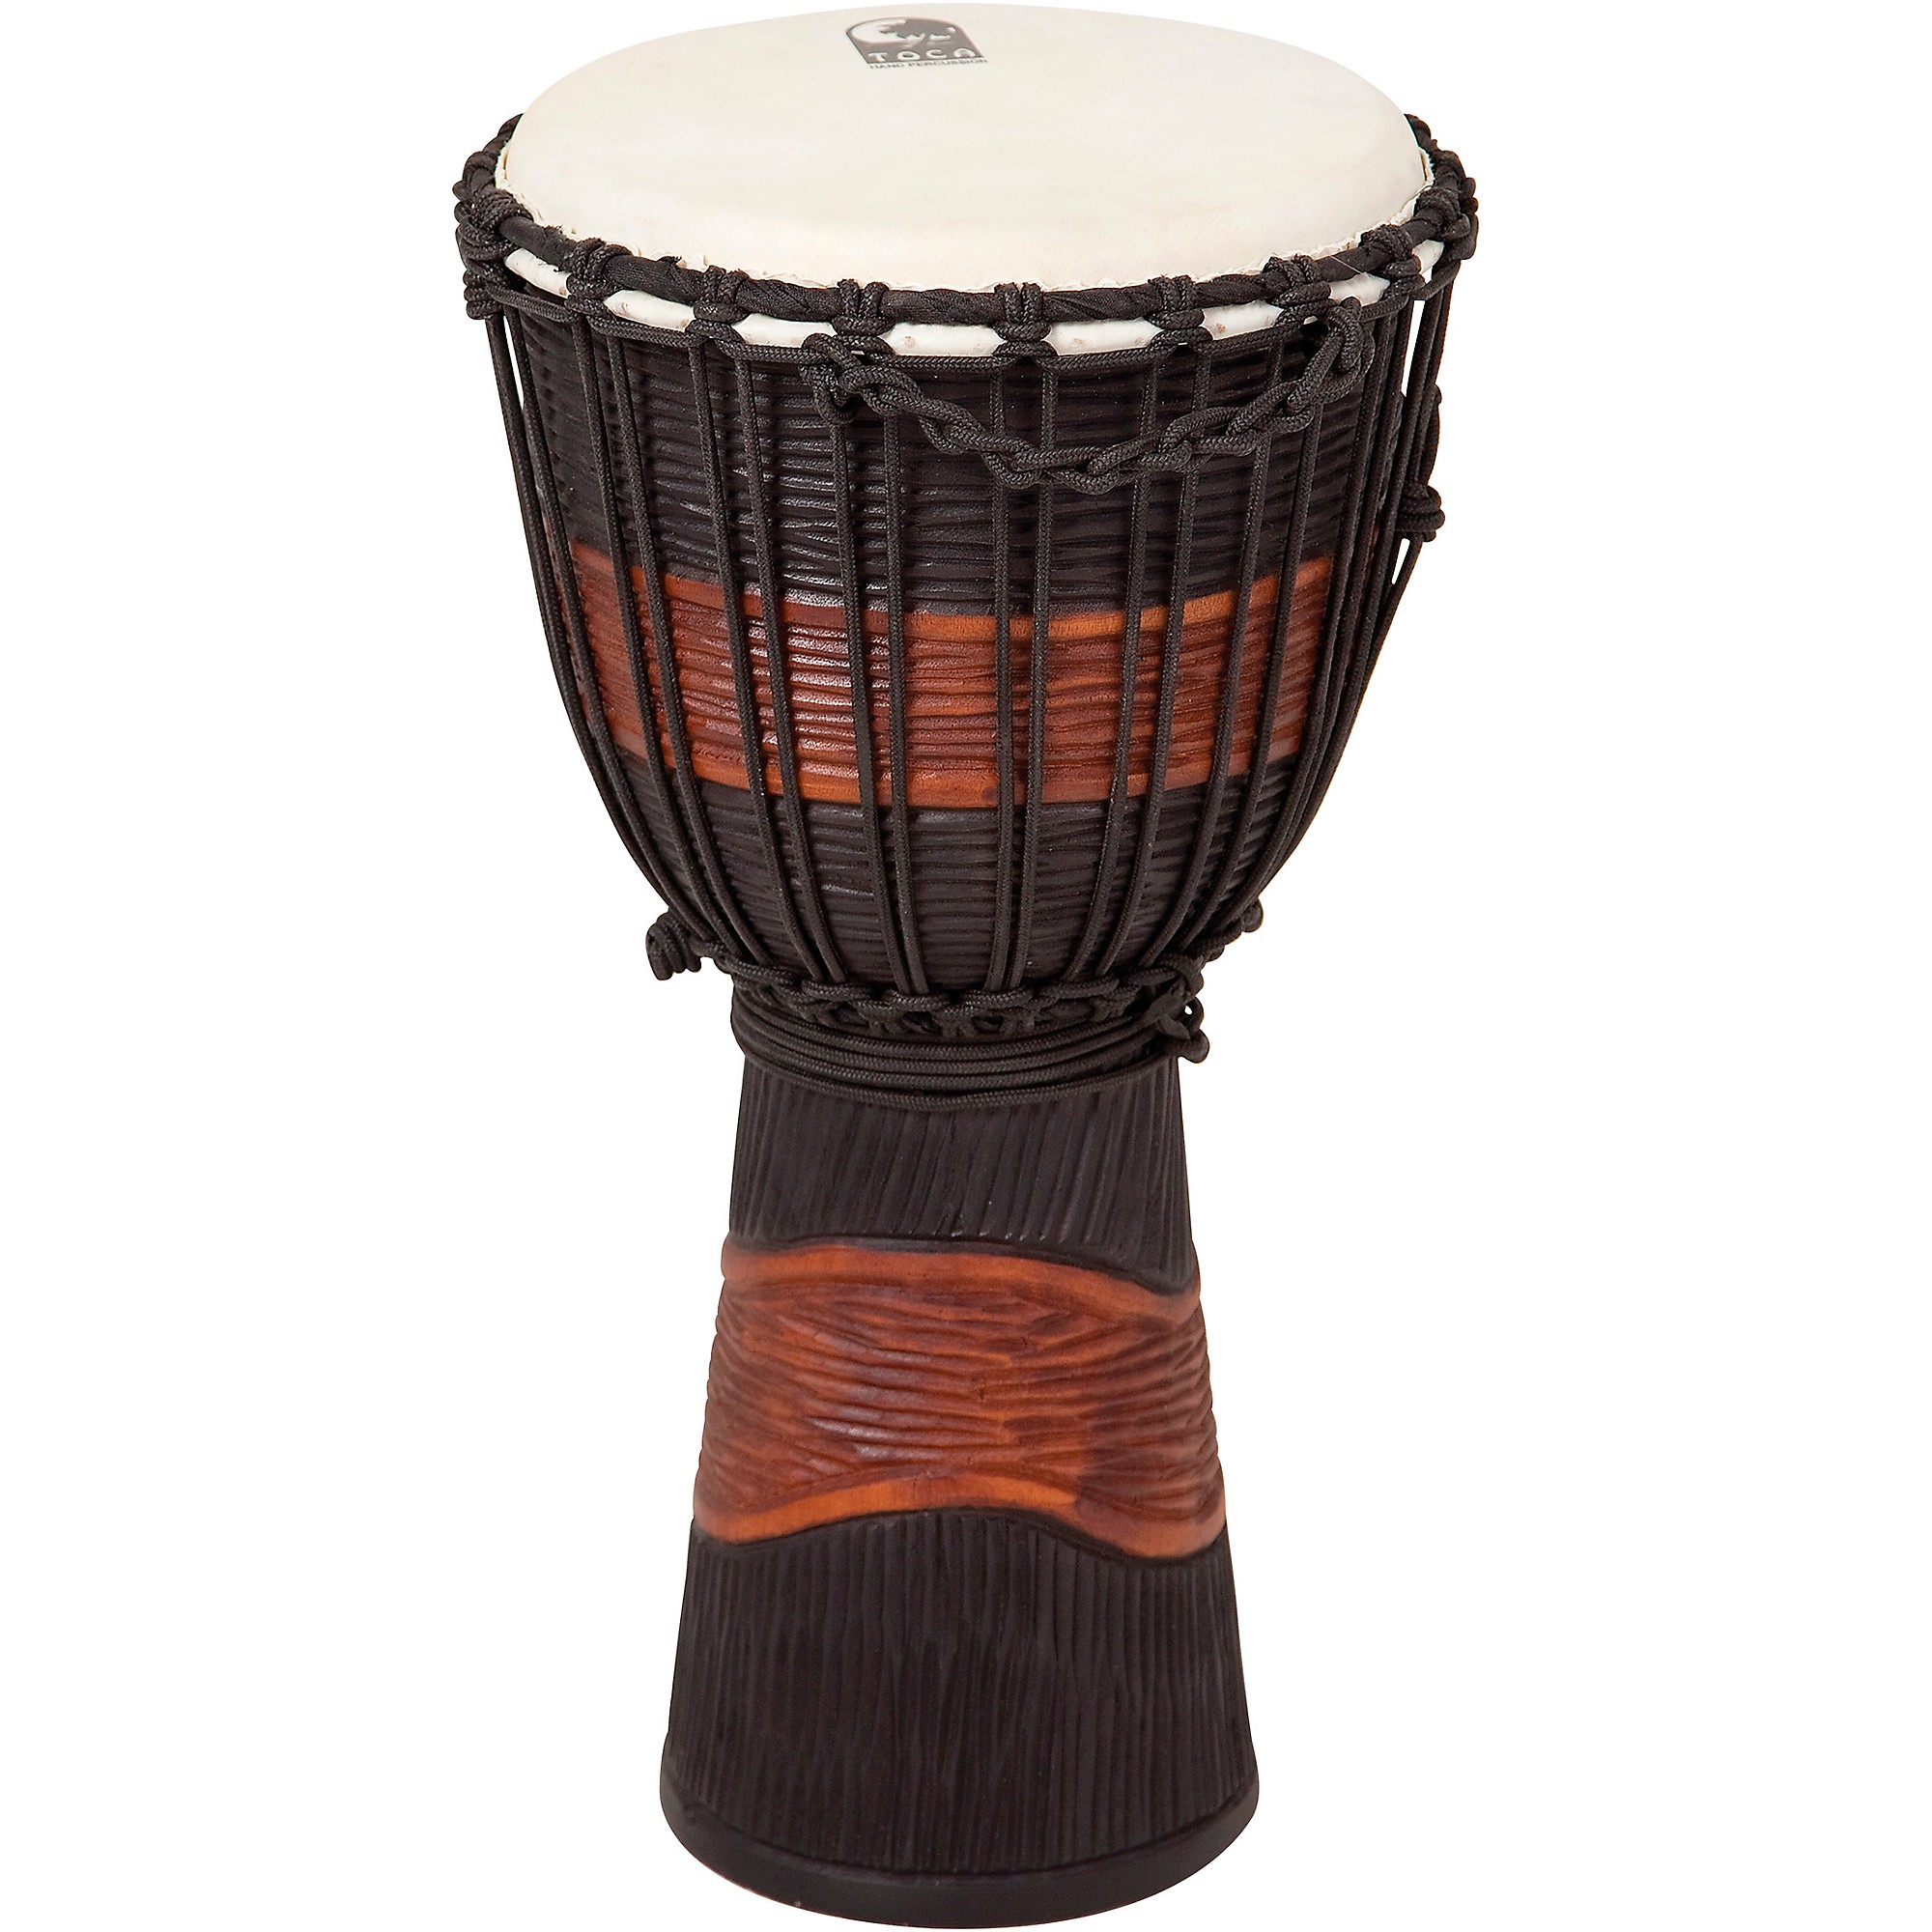 Buy Remo Kids Percussion Djembe Drum - Fabric Rain Forest, 8